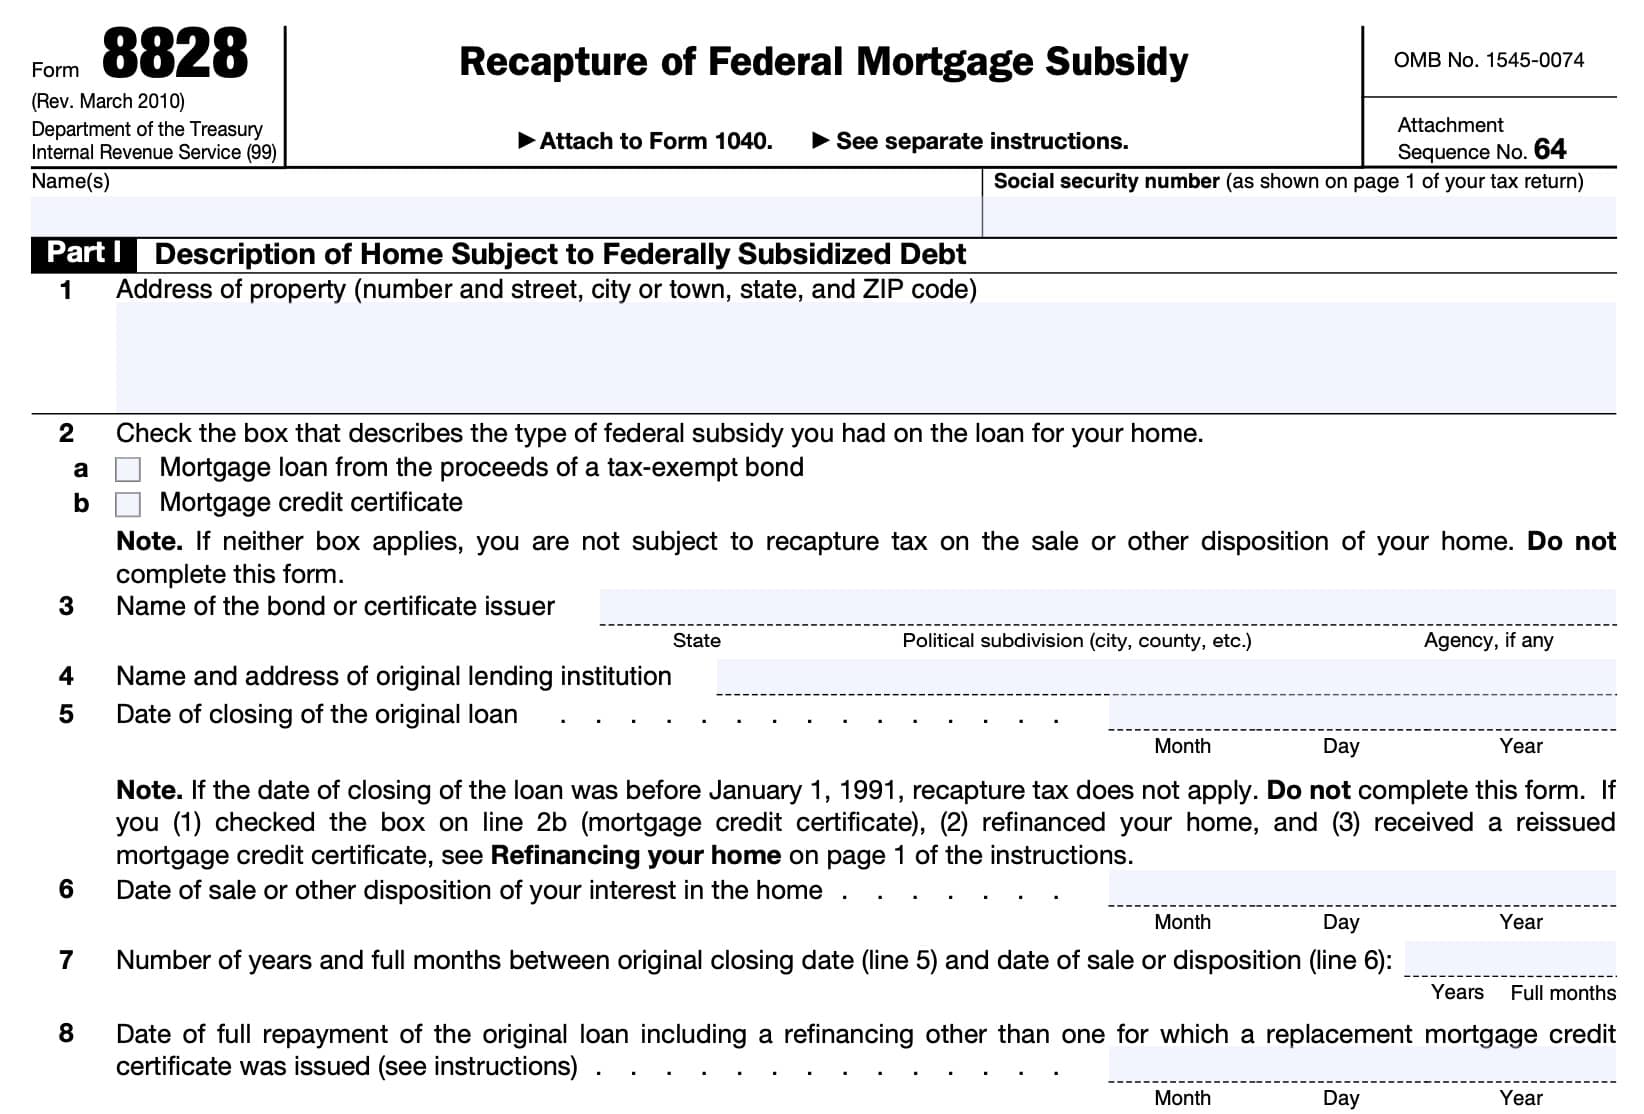 irs form 8828, part i: description of home subject to federally subsidized debt